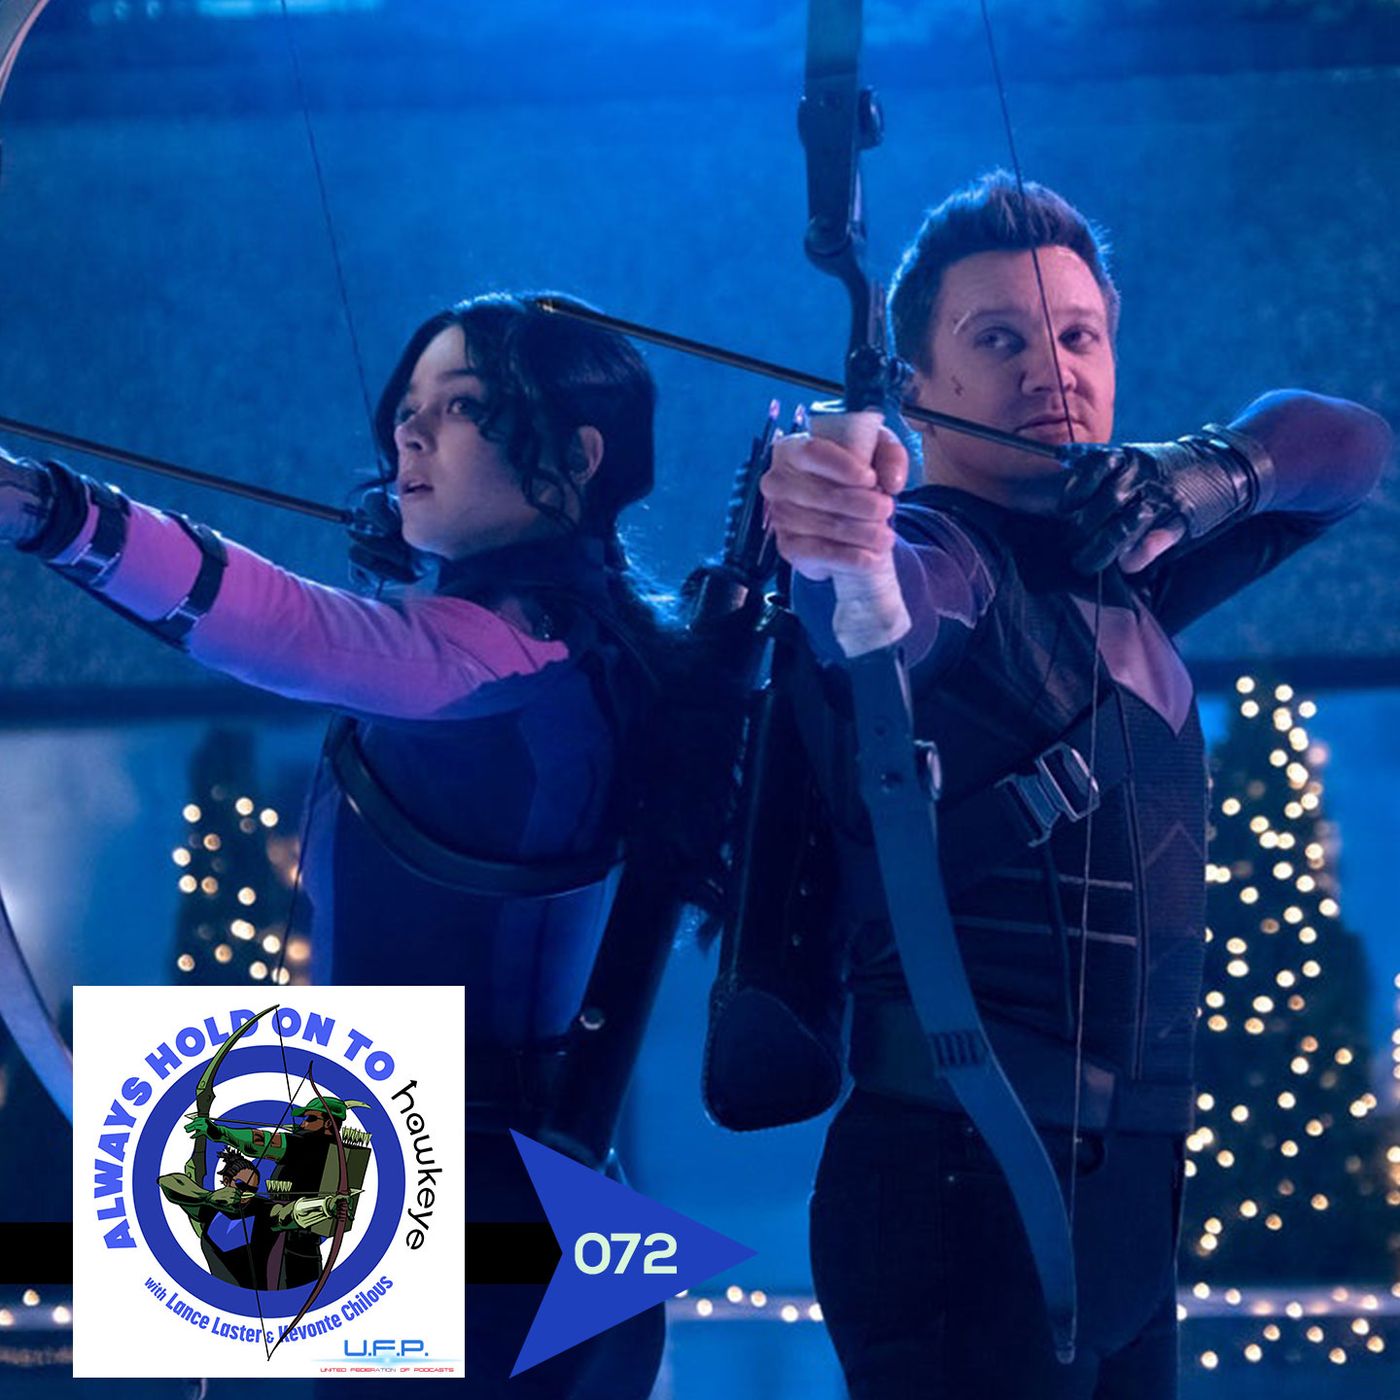 AHOTA: 072: Always Hold On To Hawkeye (Episodes 1 & 2)